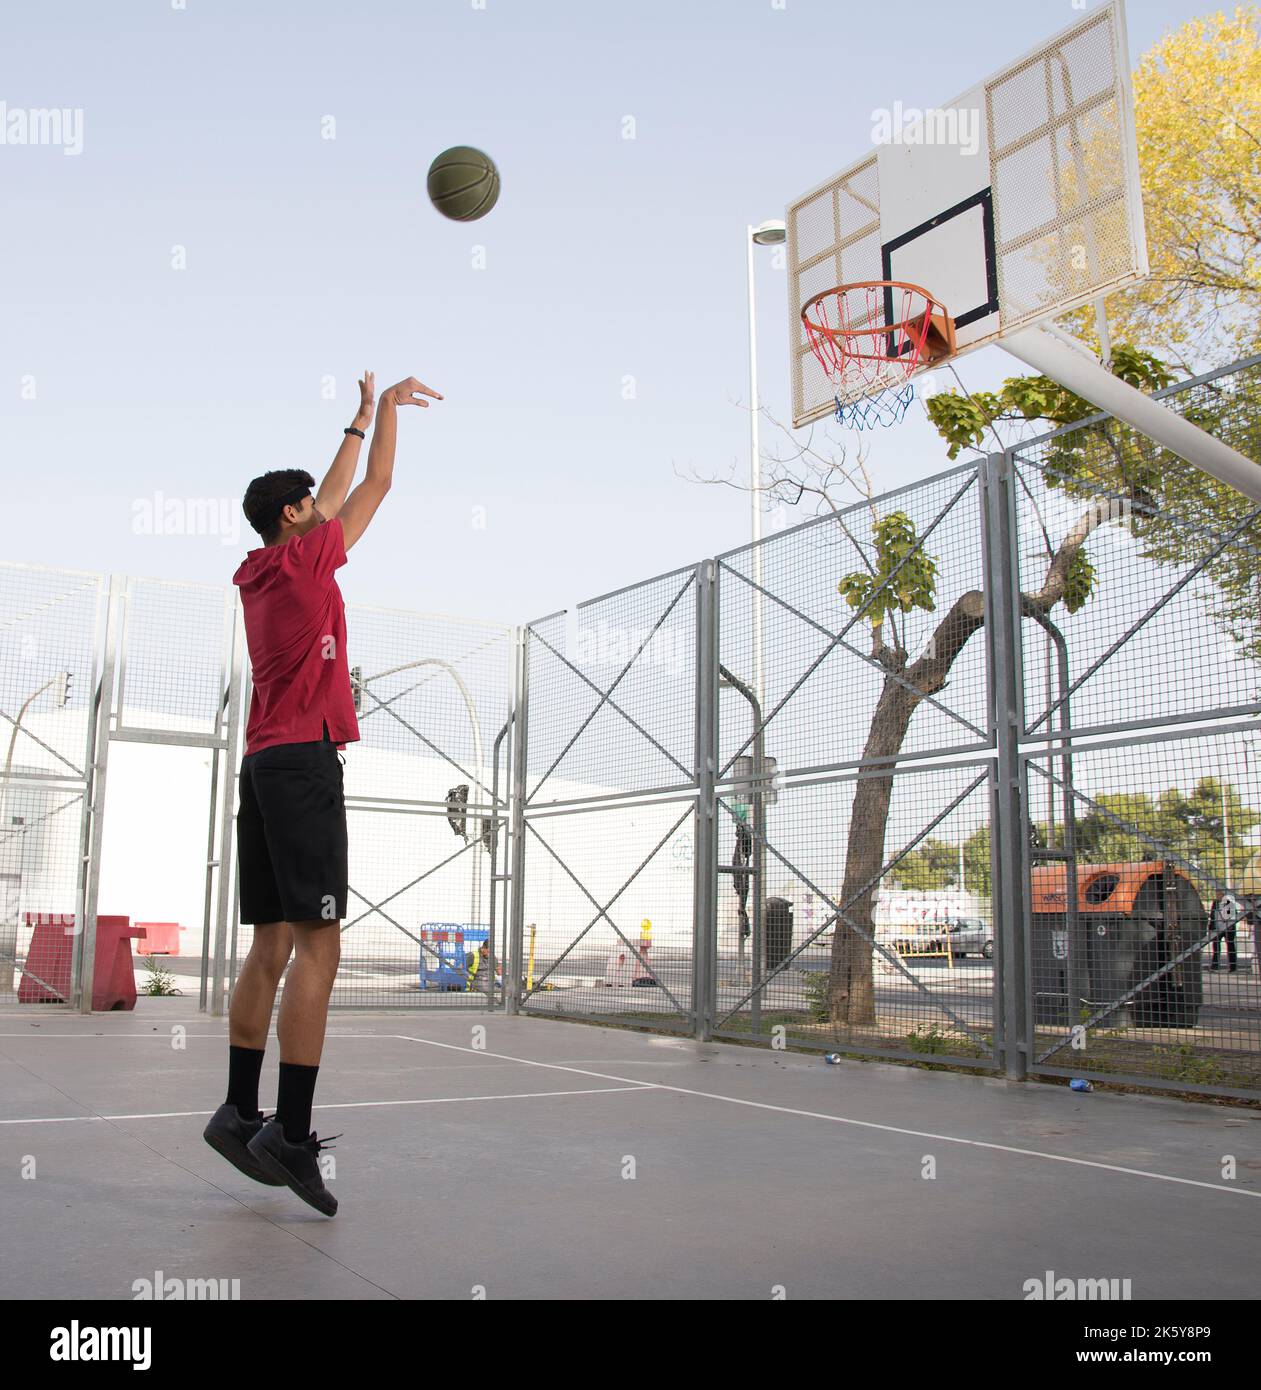 Athletic male playing basketball outdoors Stock Photo